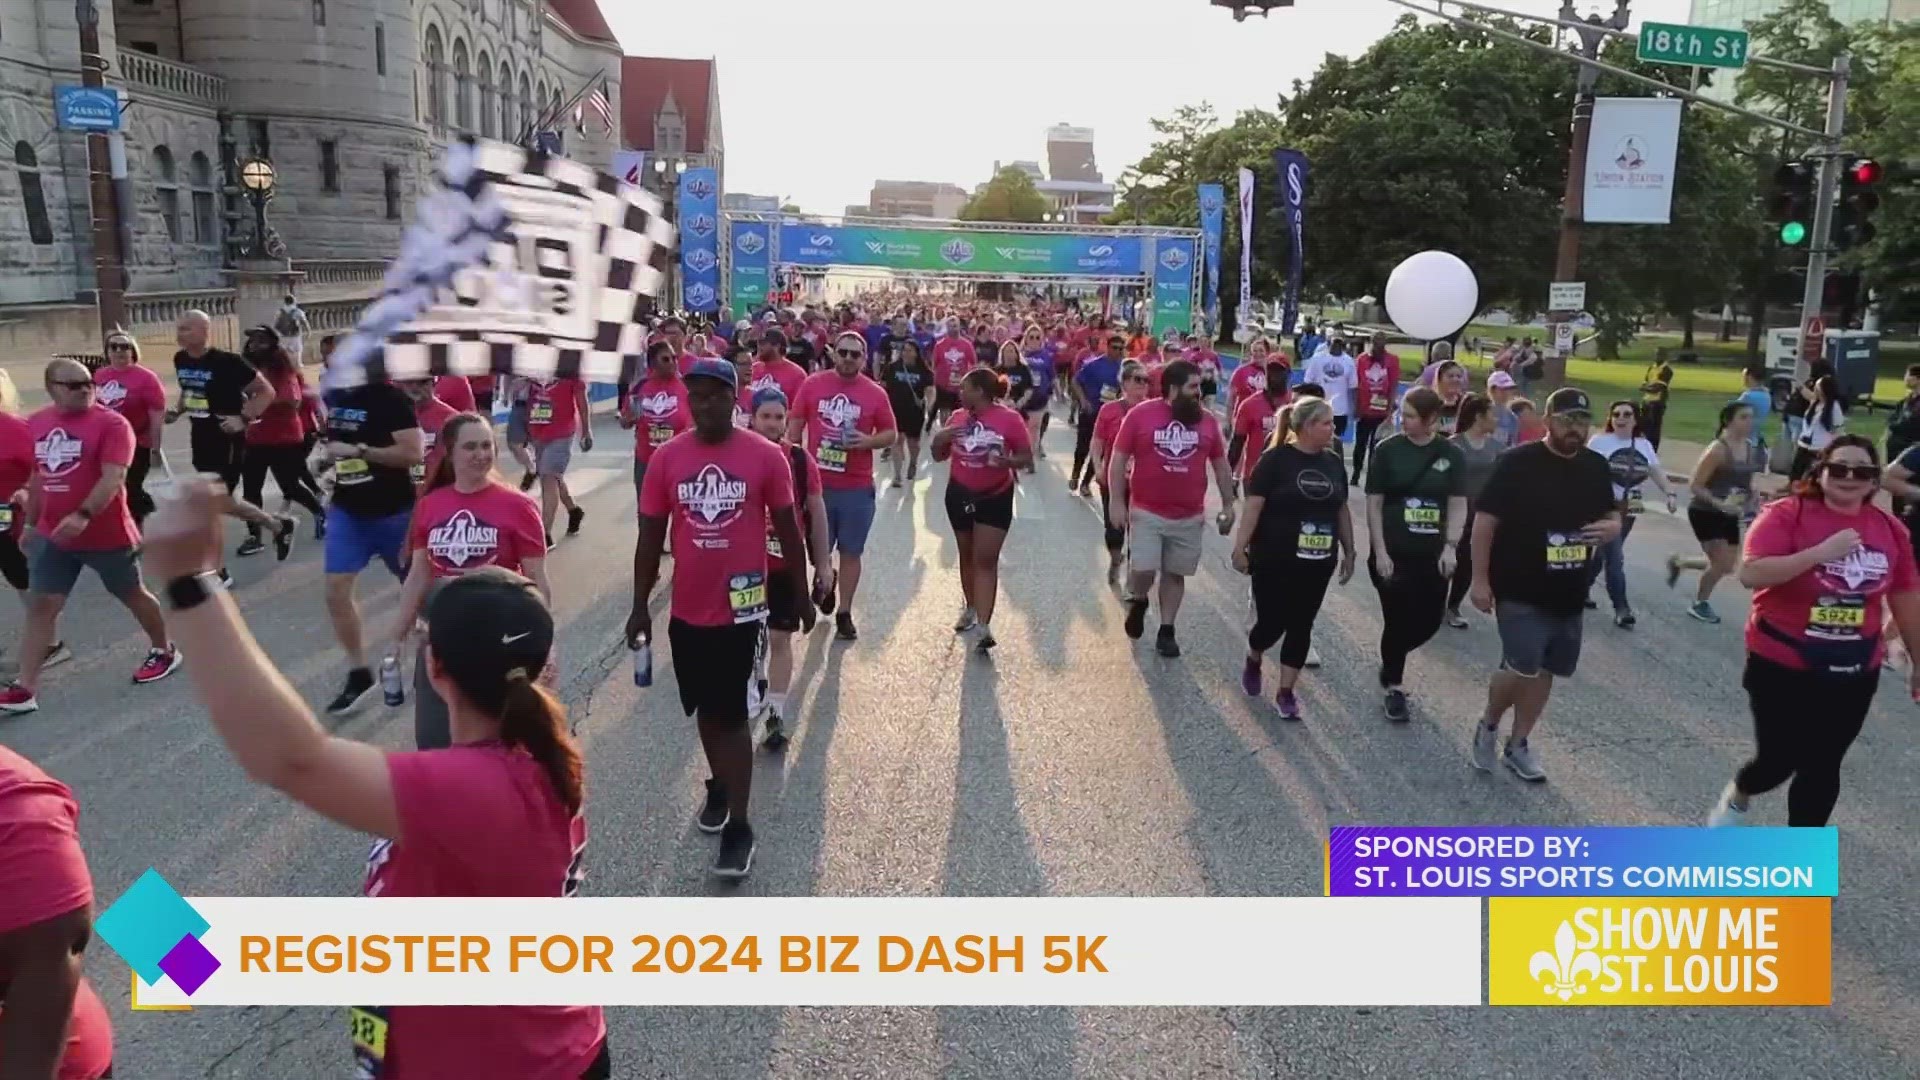 The Biz Dash 5K is an employee engagement activity, happy hour festival and 5K run/walk all in one. The event is not a typical 5K.